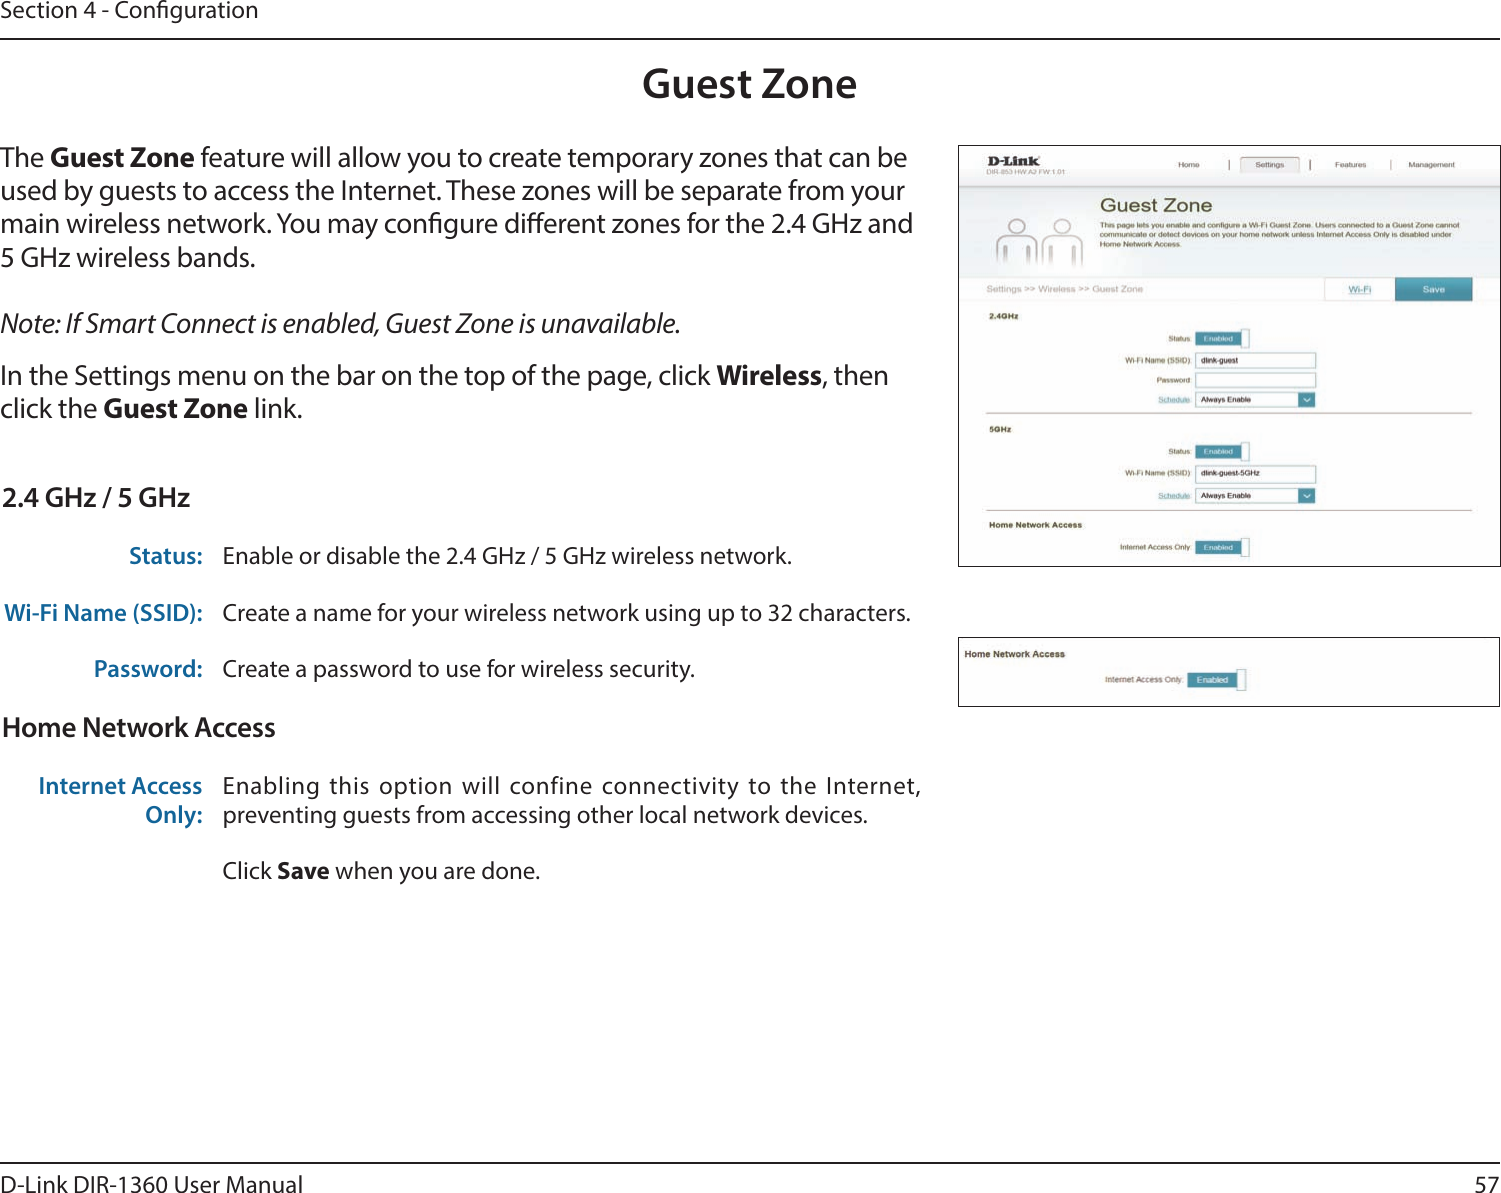 57D-Link DIR-1360 User ManualSection 4 - CongurationGuest ZoneIn the Settings menu on the bar on the top of the page, click Wireless, then click the Guest Zone link. The Guest Zone feature will allow you to create temporary zones that can be used by guests to access the Internet. These zones will be separate from your main wireless network. You may congure dierent zones for the 2.4 GHz and 5 GHz wireless bands.Note: If Smart Connect is enabled, Guest Zone is unavailable.2.4 GHz / 5 GHzStatus: Enable or disable the 2.4 GHz / 5 GHz wireless network.Wi-Fi Name (SSID): Create a name for your wireless network using up to 32 characters. Password: Create a password to use for wireless security. Home Network AccessInternet Access Only:Enabling this option will confine connectivity to the Internet, preventing guests from accessing other local network devices.Click Save when you are done.